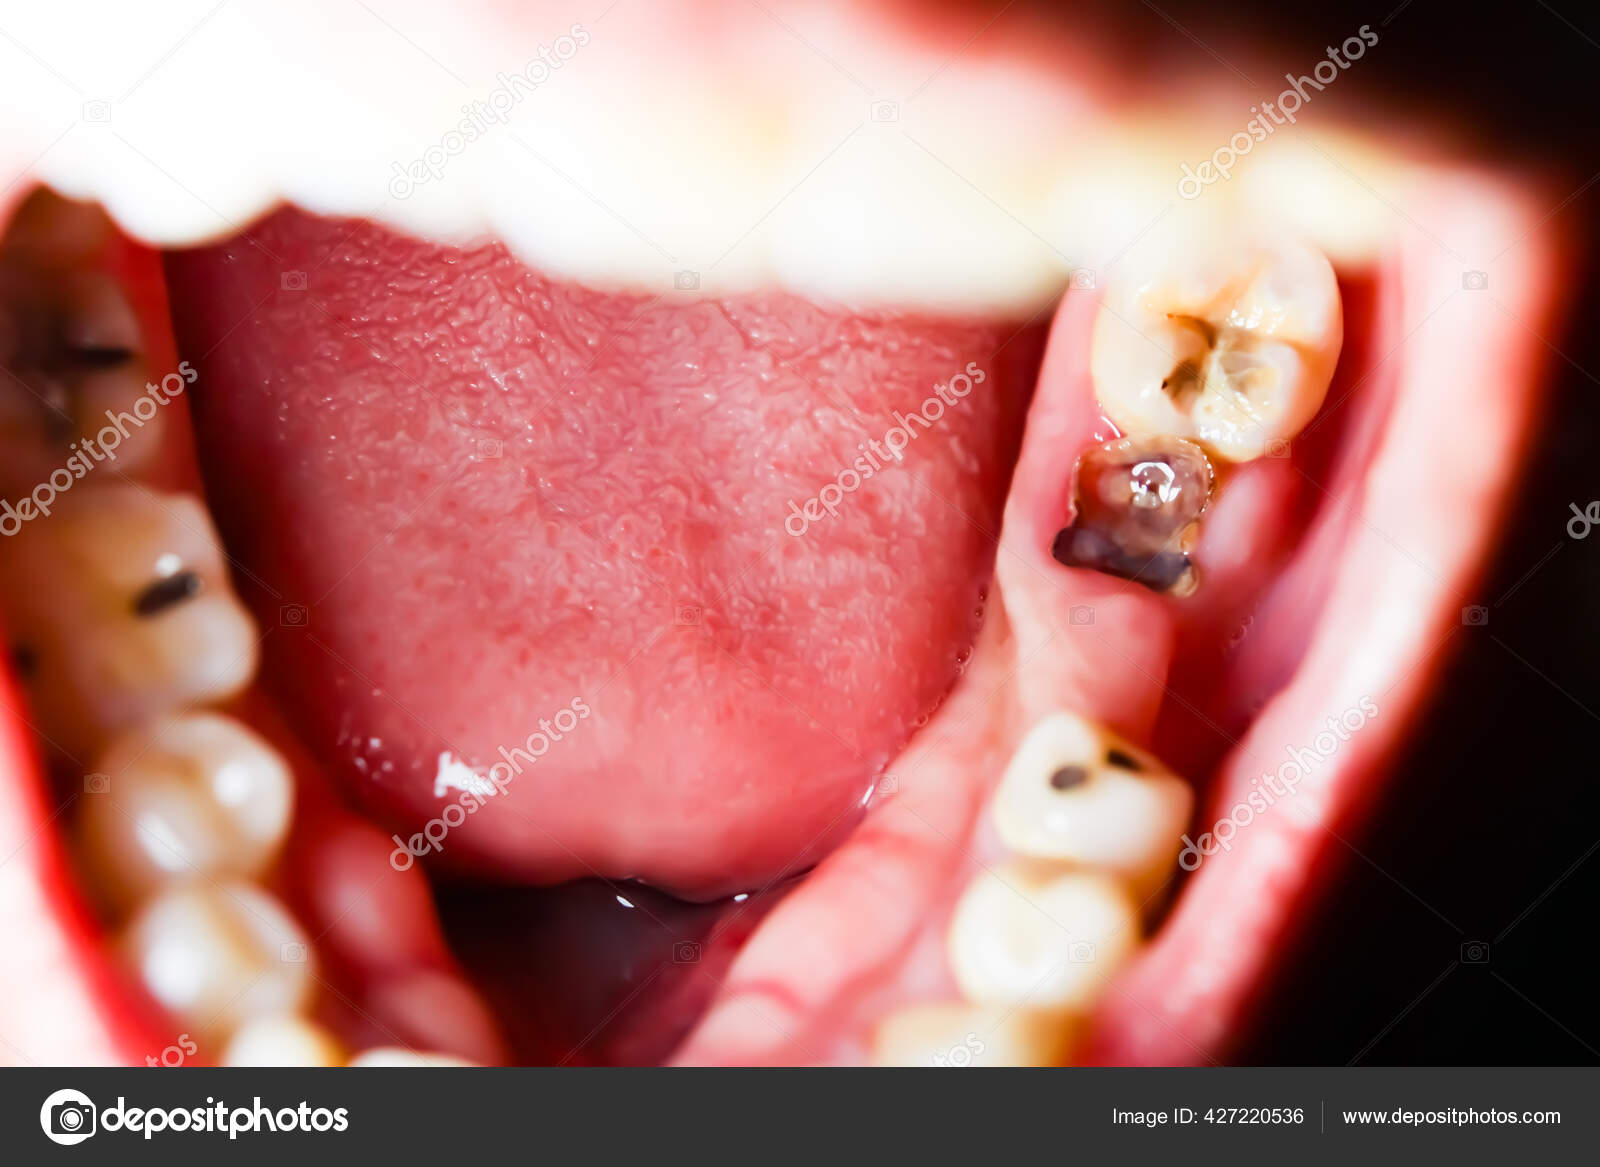 Early Stages of Tooth Decay | Spotting Tooth Decay Symptoms